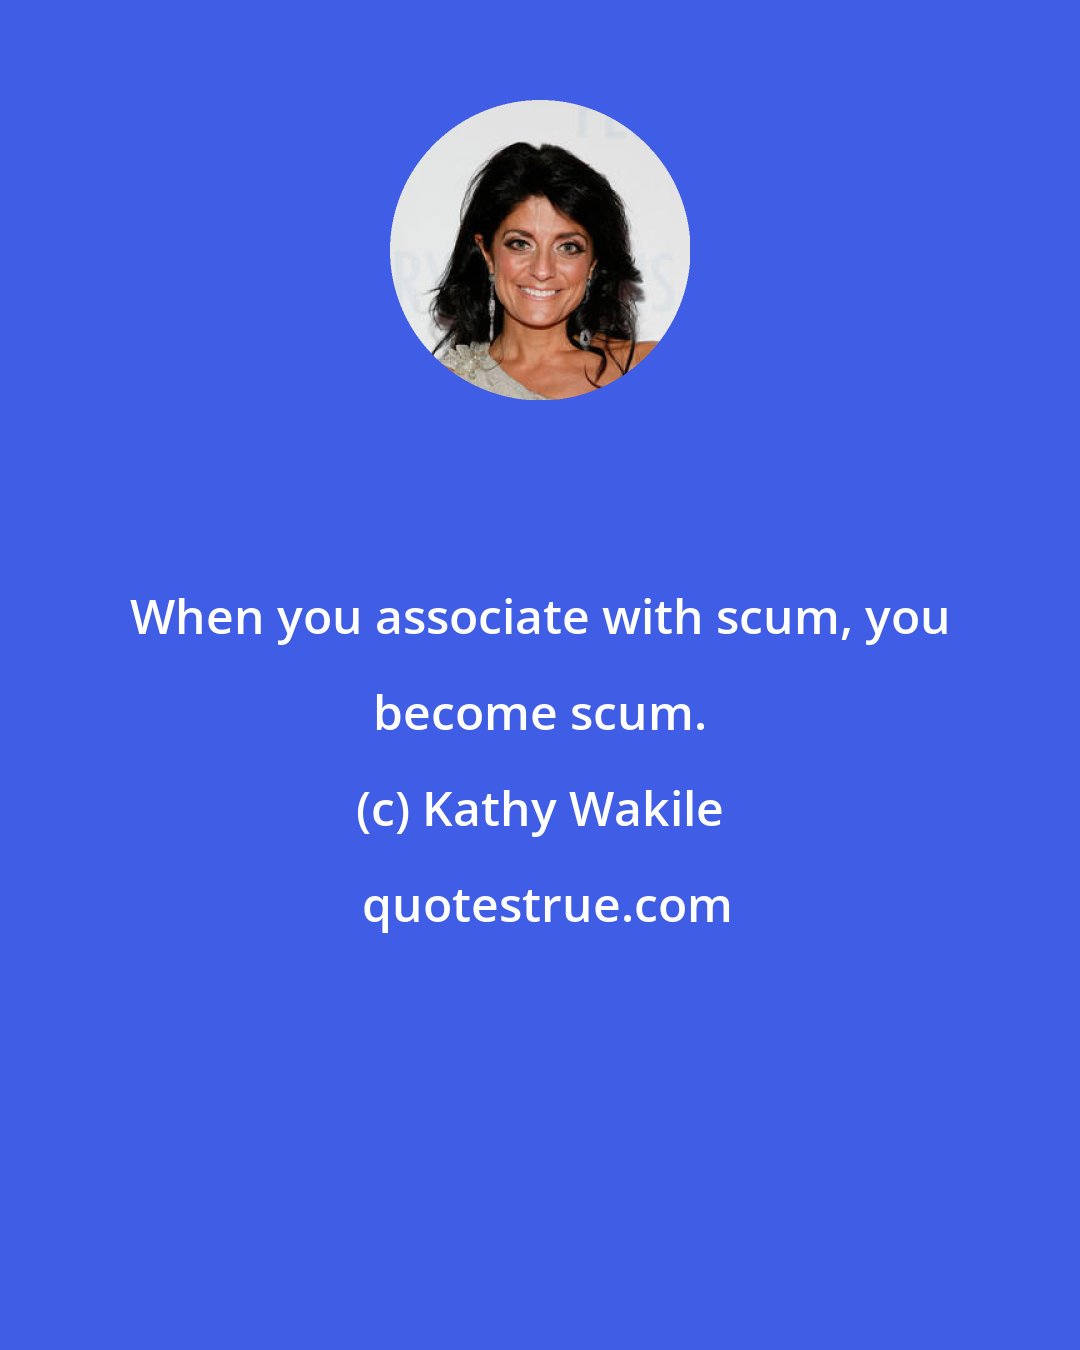 Kathy Wakile: When you associate with scum, you become scum.